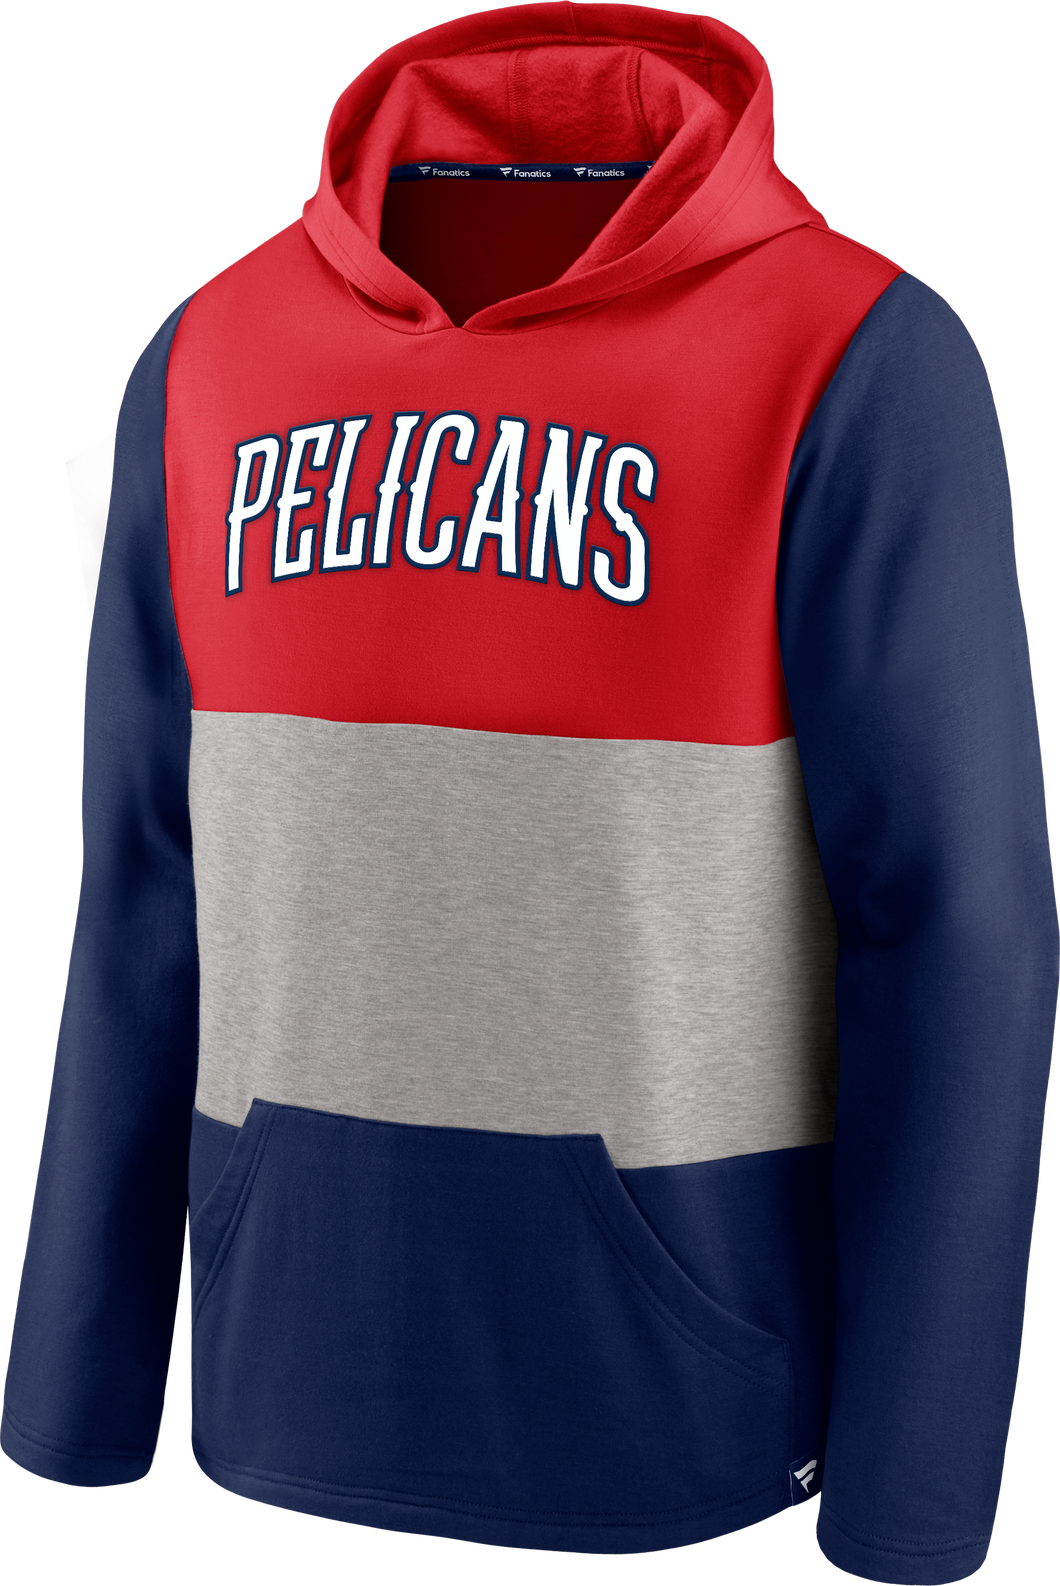 new orleans pelicans sweater